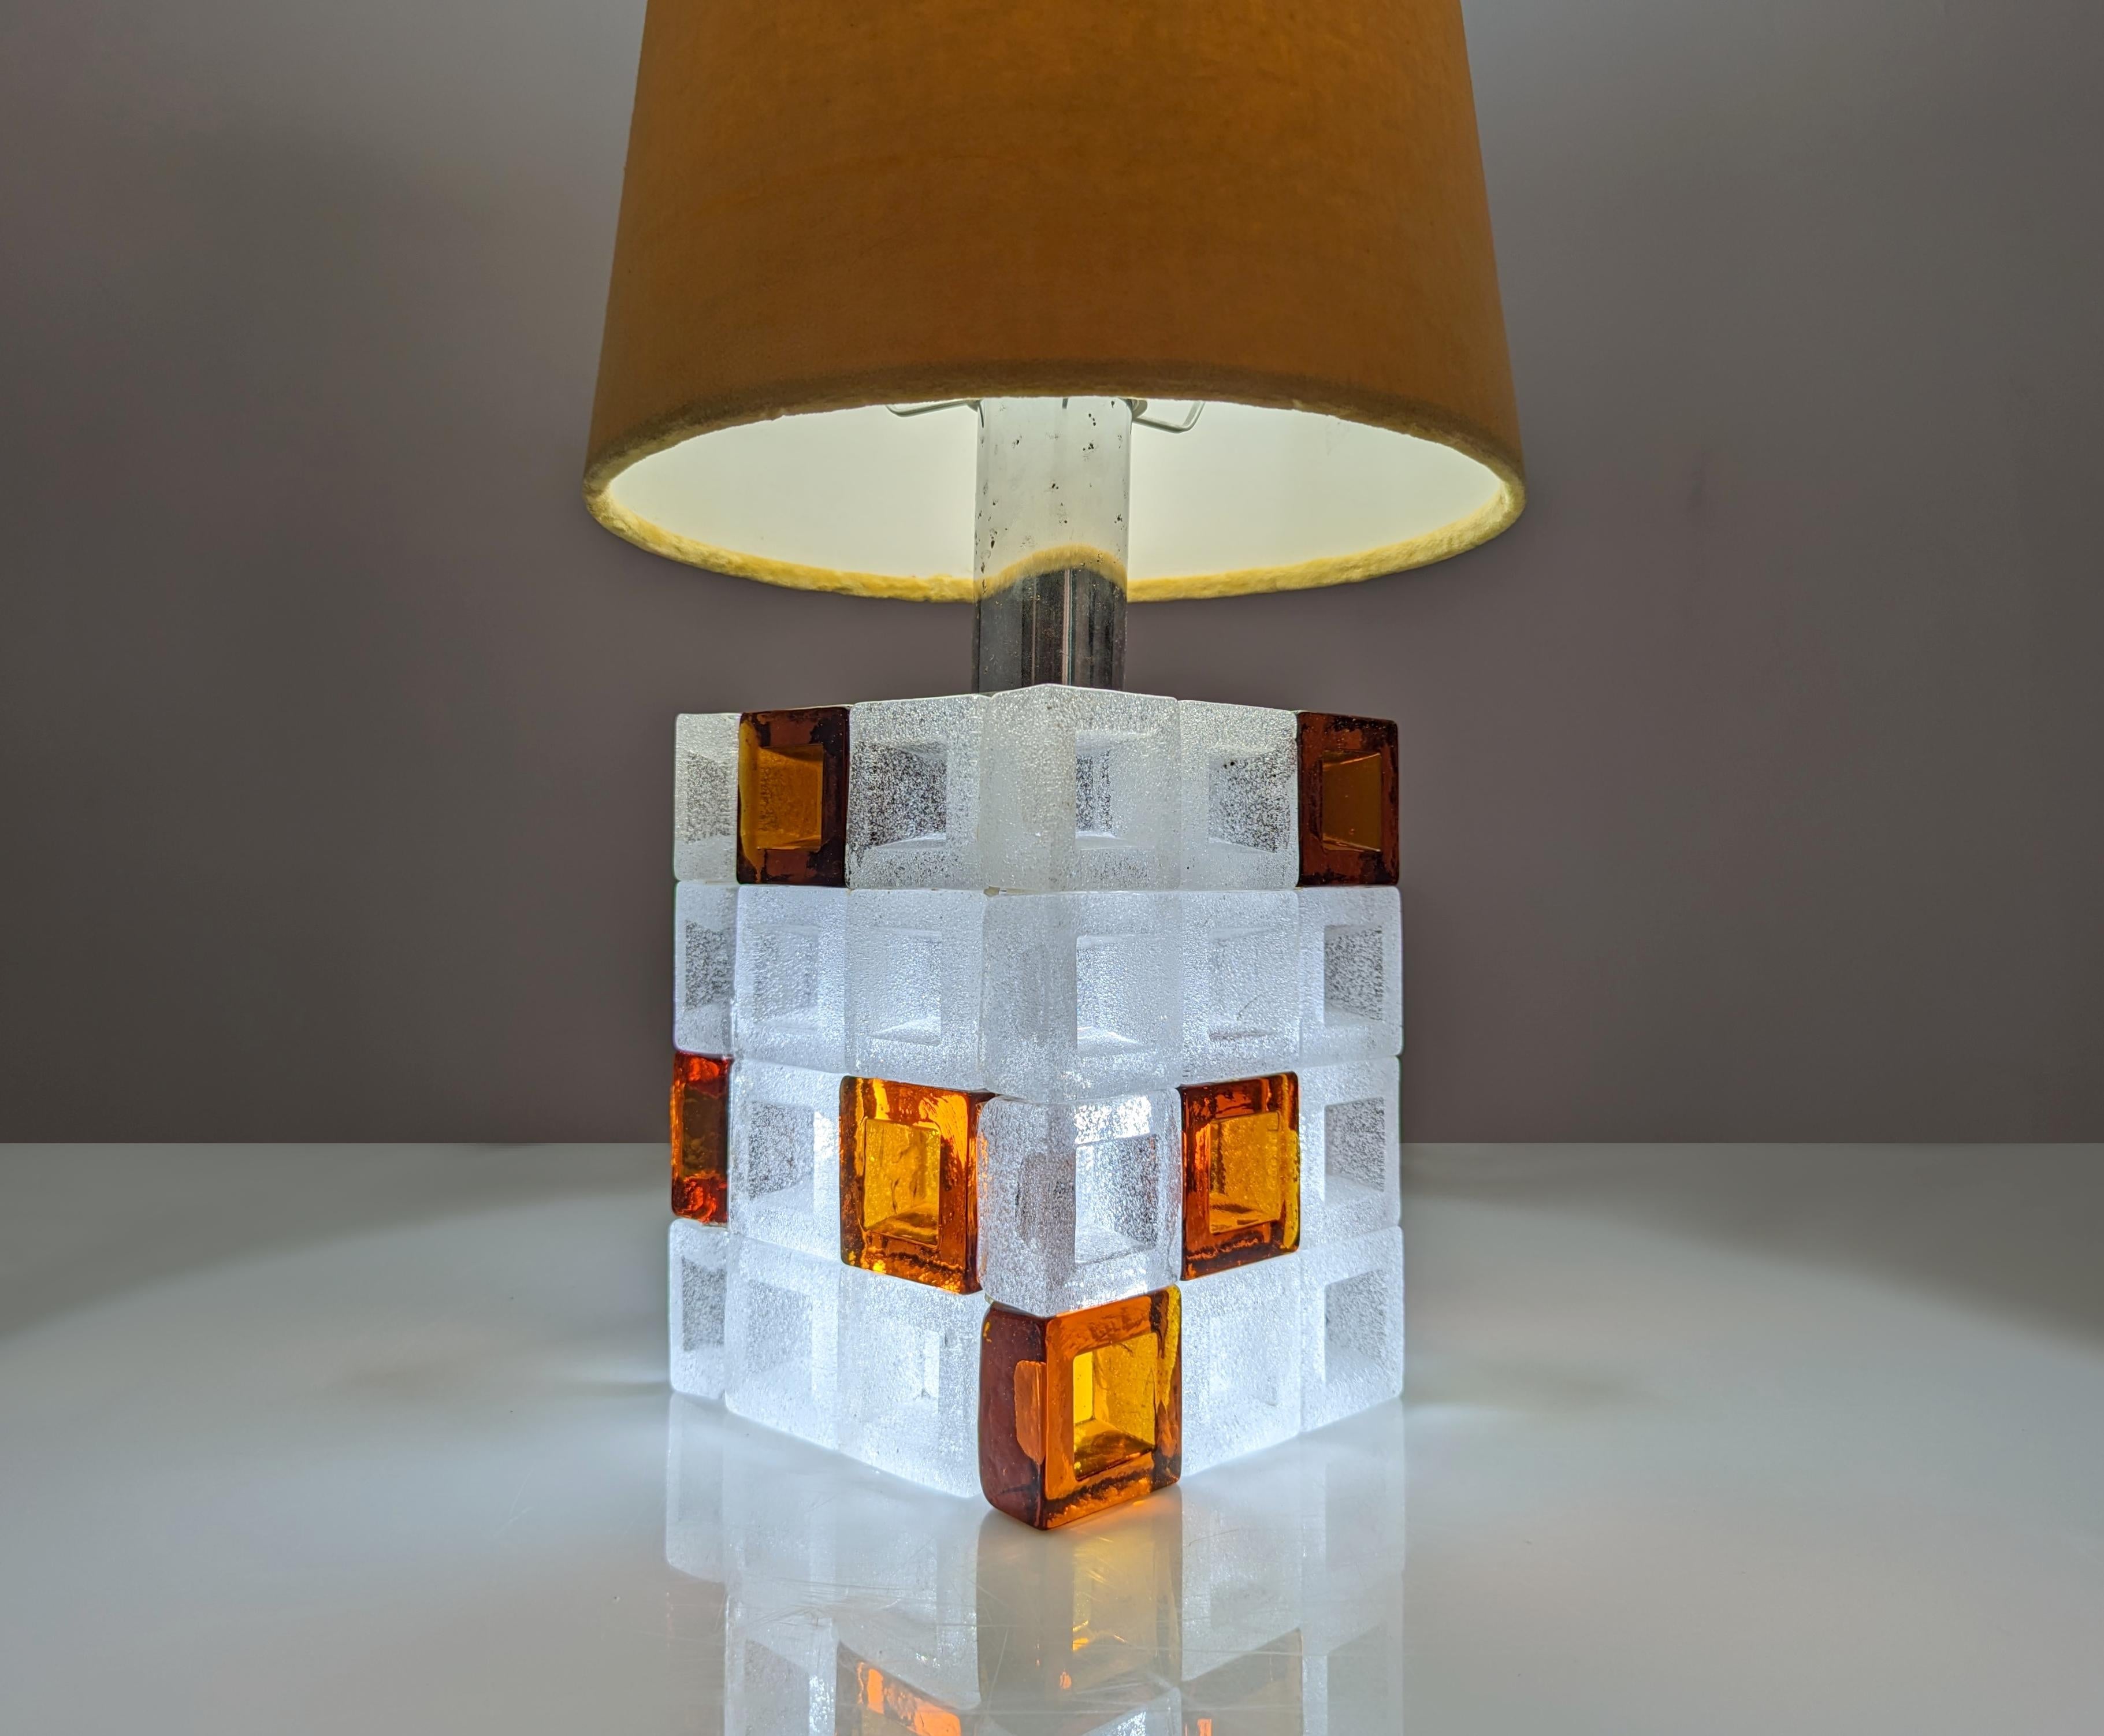 Immerse yourself in the golden age of Italian design with this exquisite lamp by Albano Poli, a timeless masterpiece that blends the craftsmanship of Murano glass with the creative vision of the 1960s. Fused glass cubes in ice white and amber tones